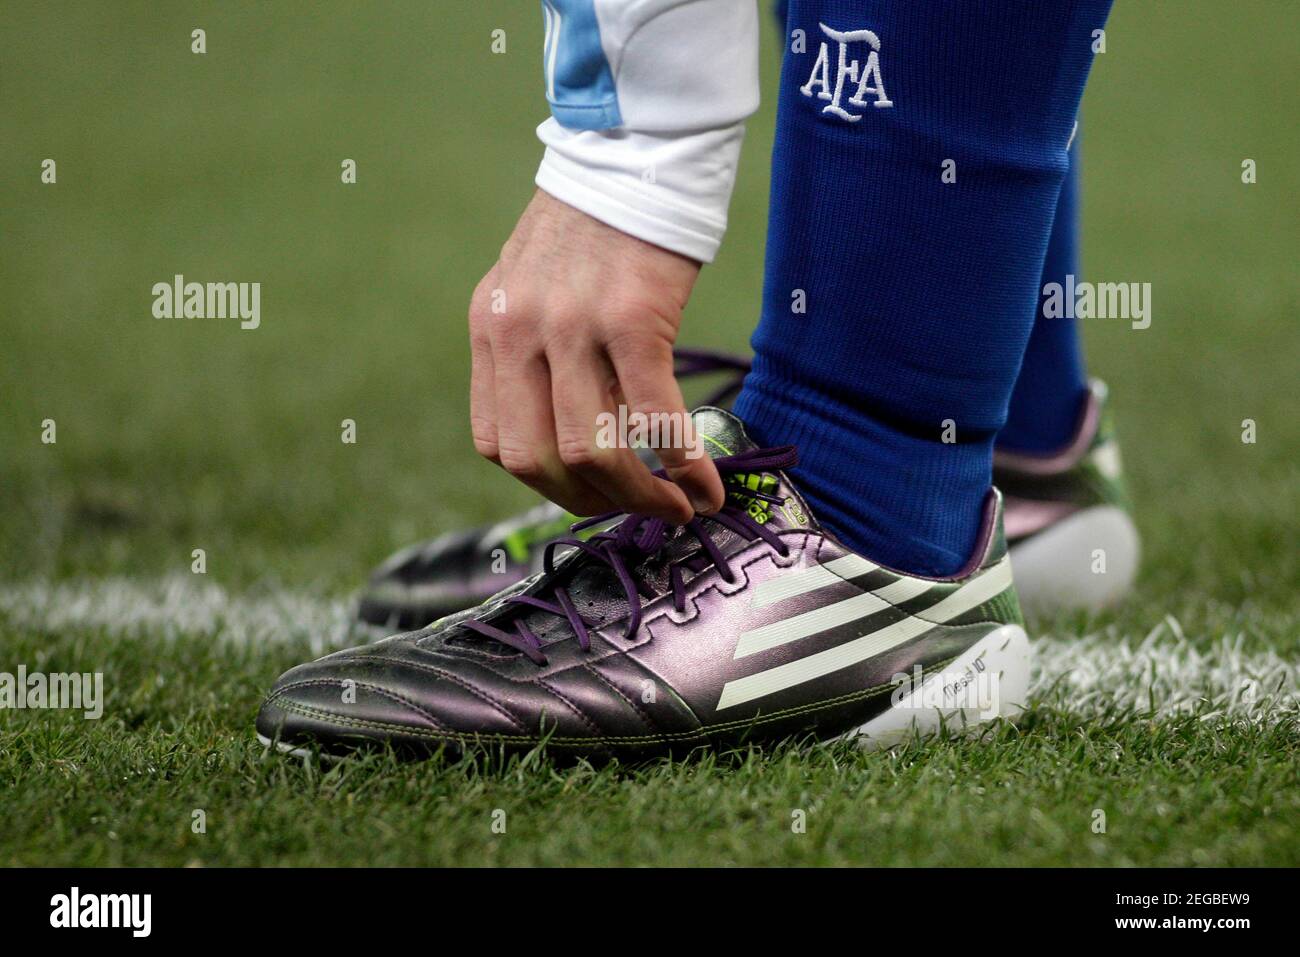 Messi Boots High Resolution Stock Photography and Images - Alamy